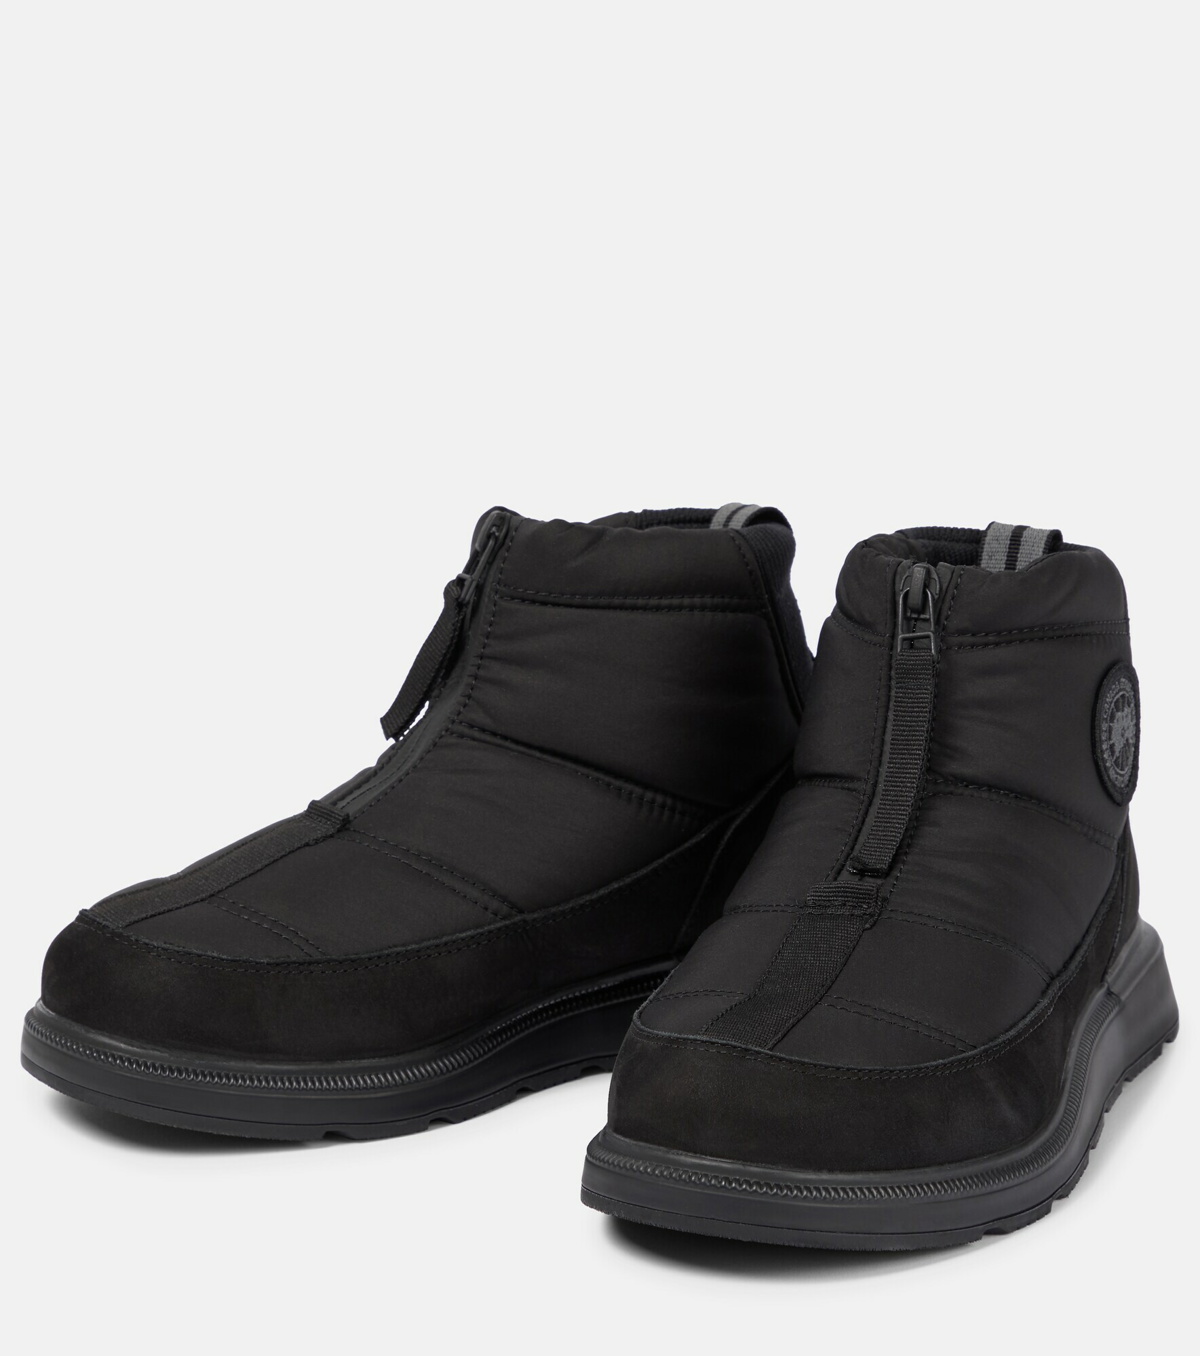 Canada Goose - Cypress padded ankle boots Canada Goose